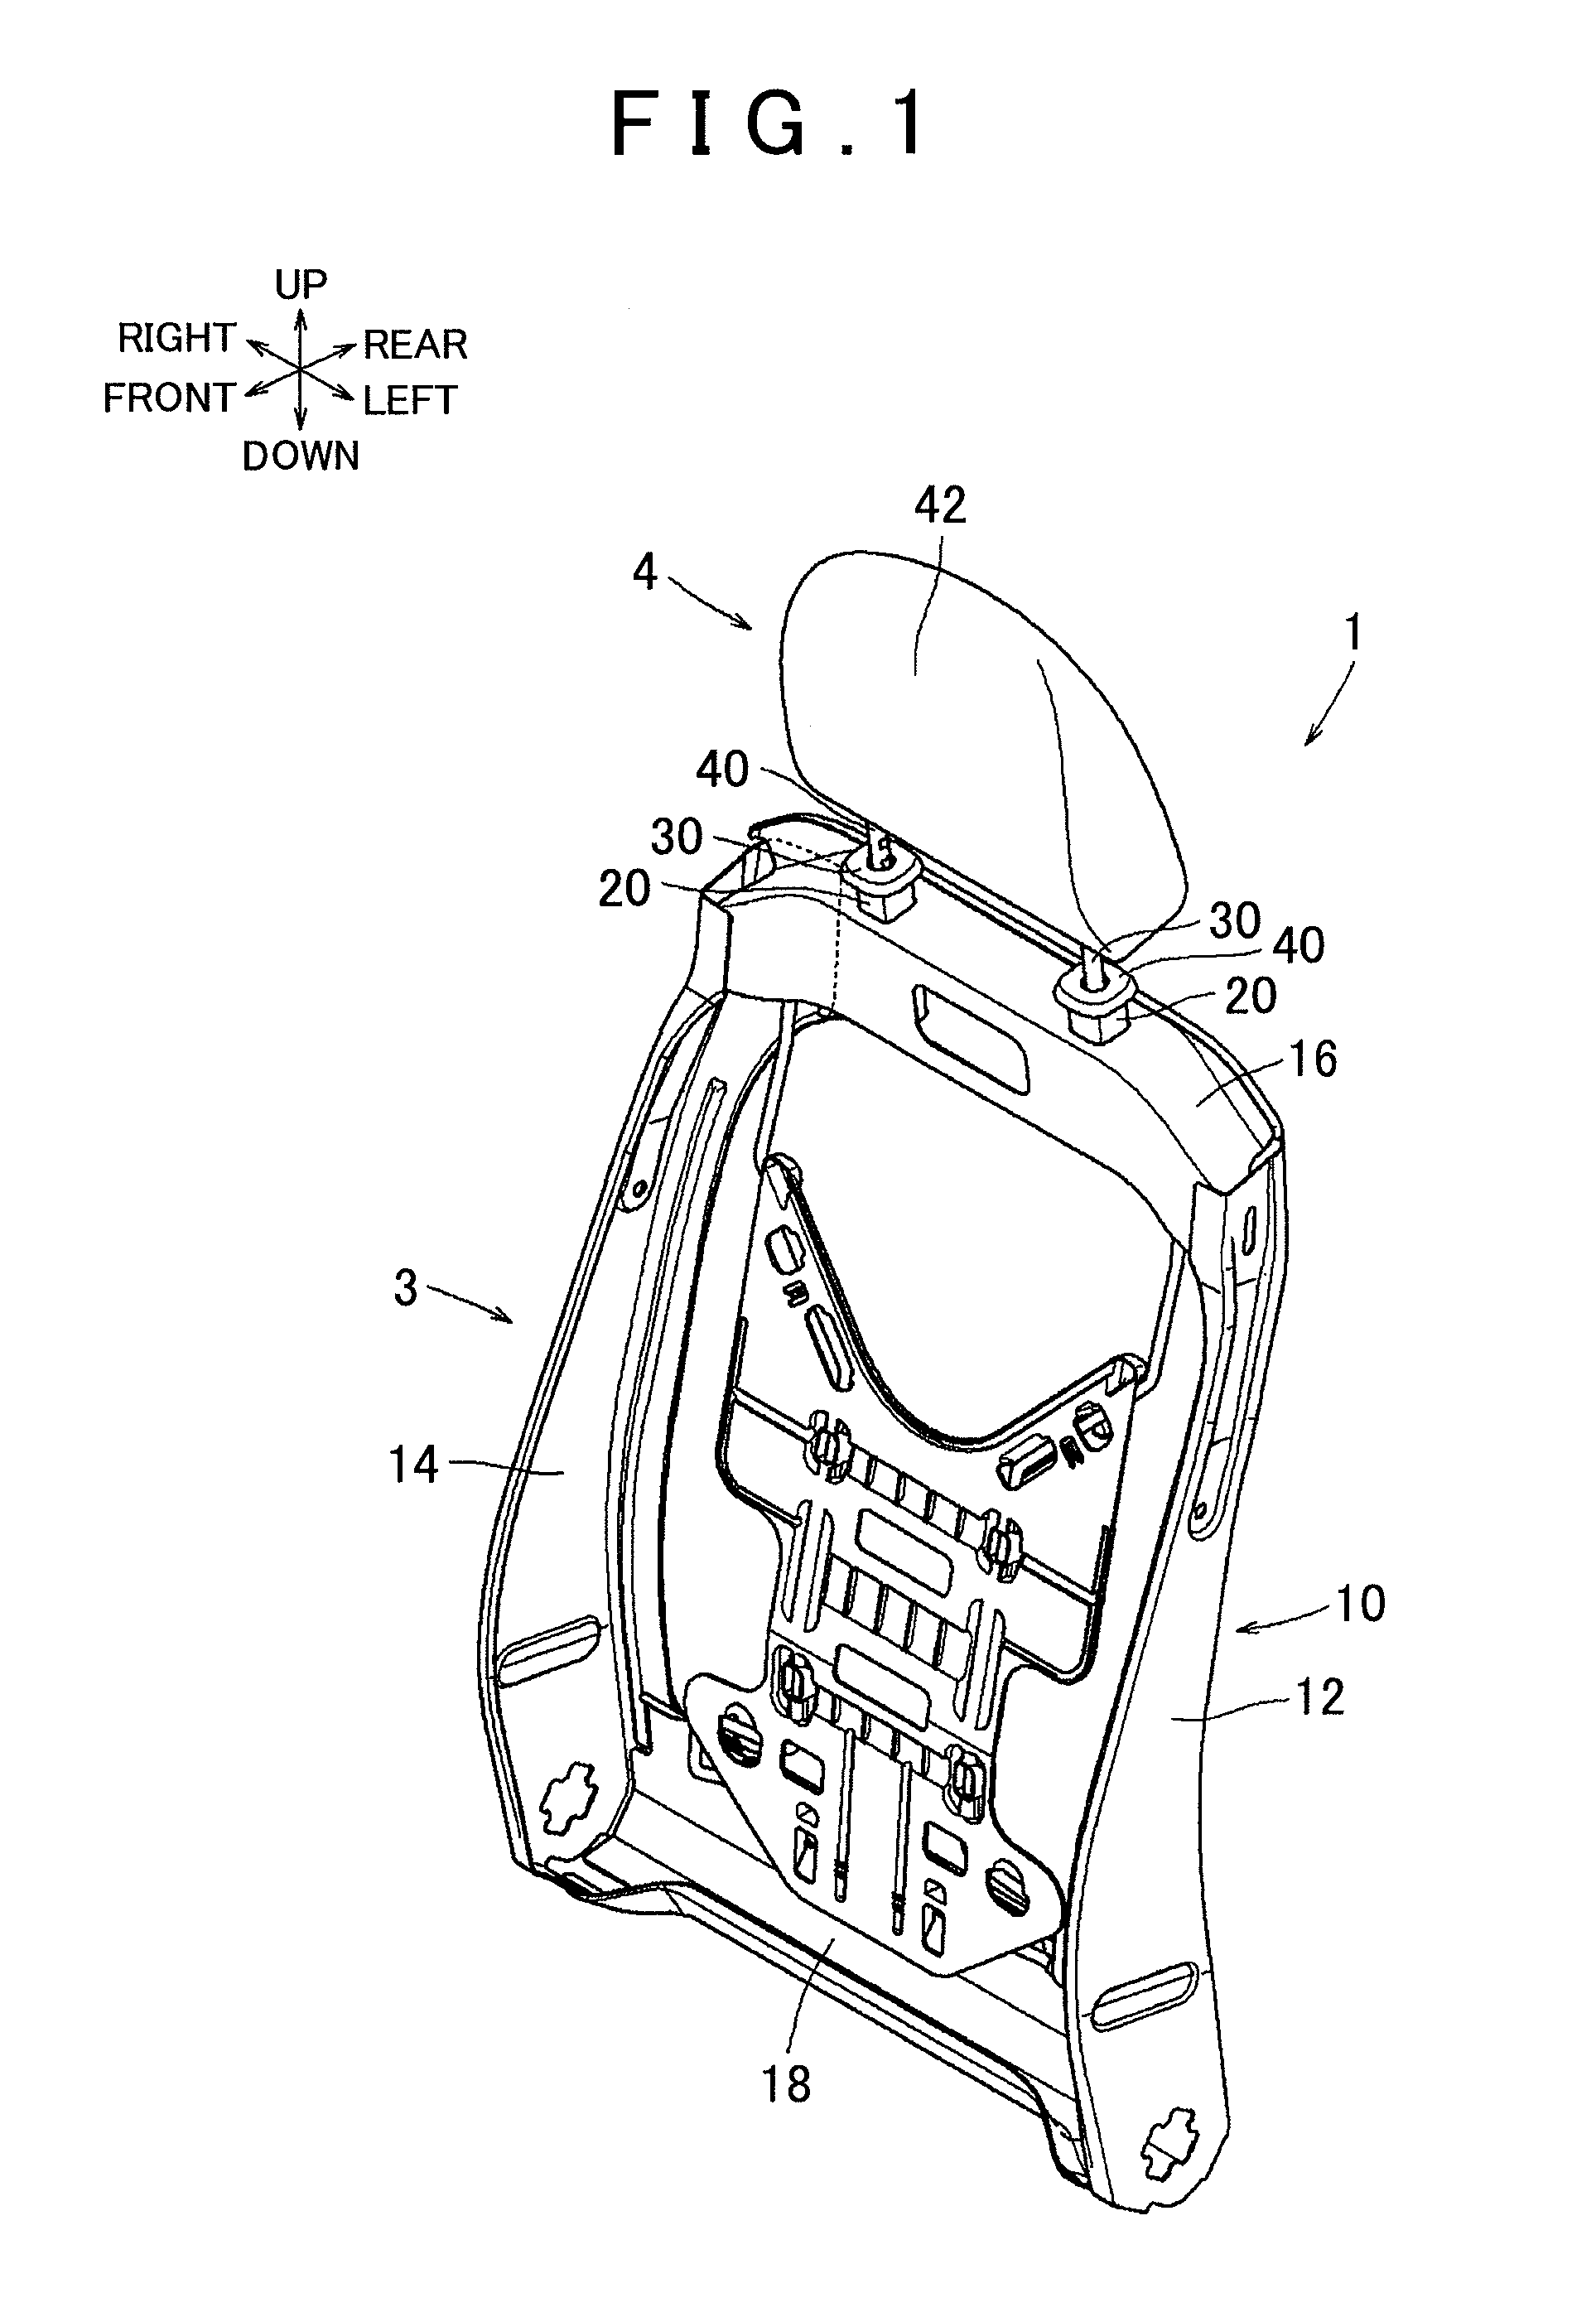 Headrest mounting structure vehicle seat